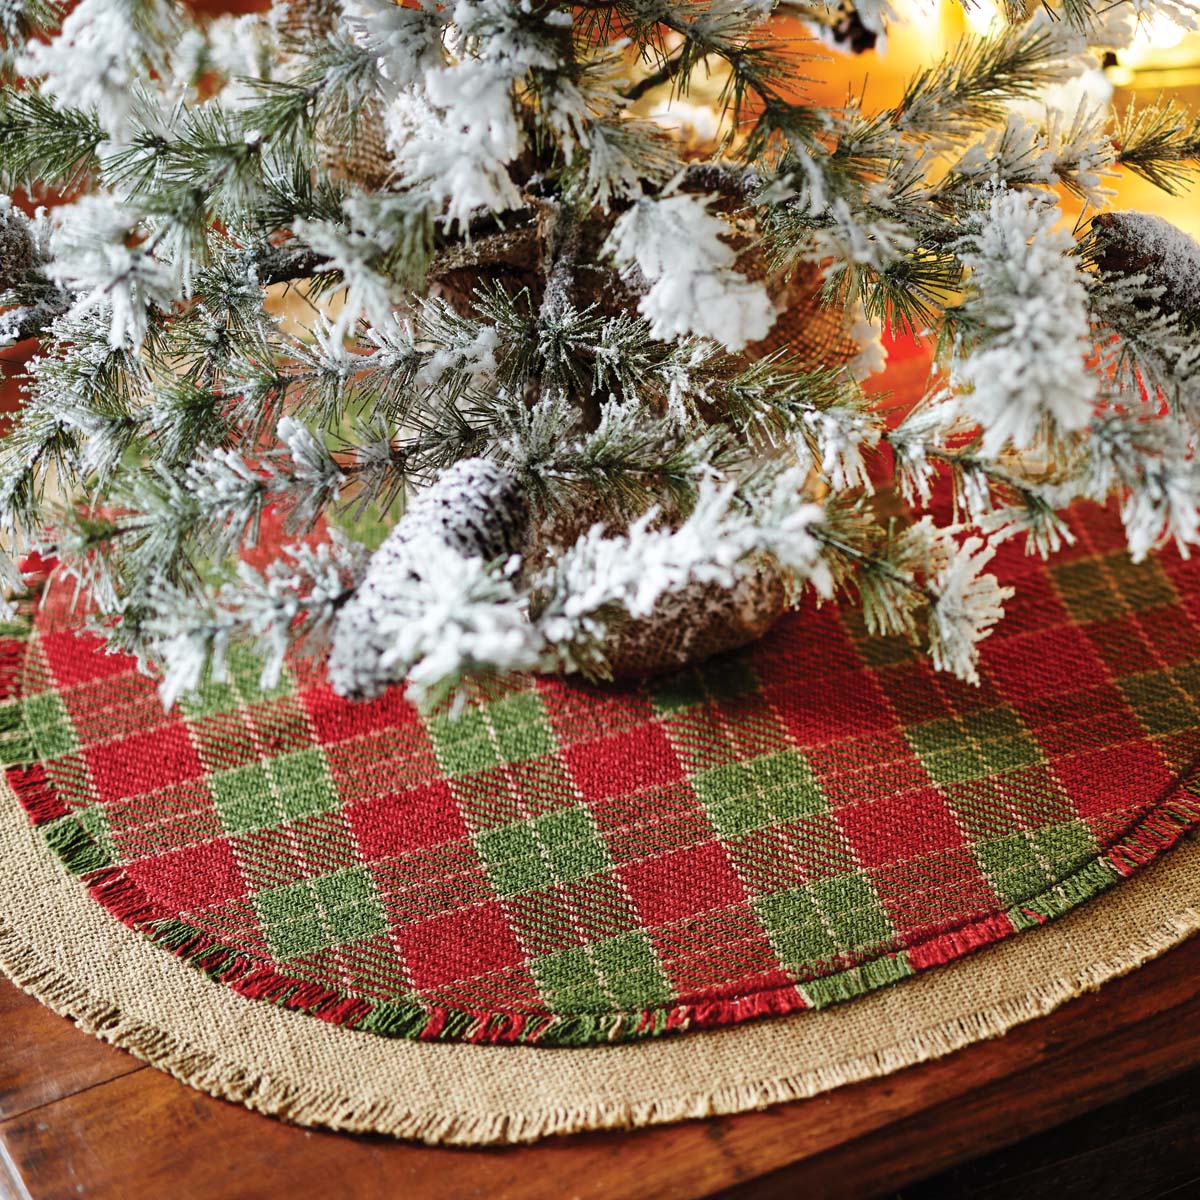 Robert Mini 21 inch Tree Skirt - The Weed Patch